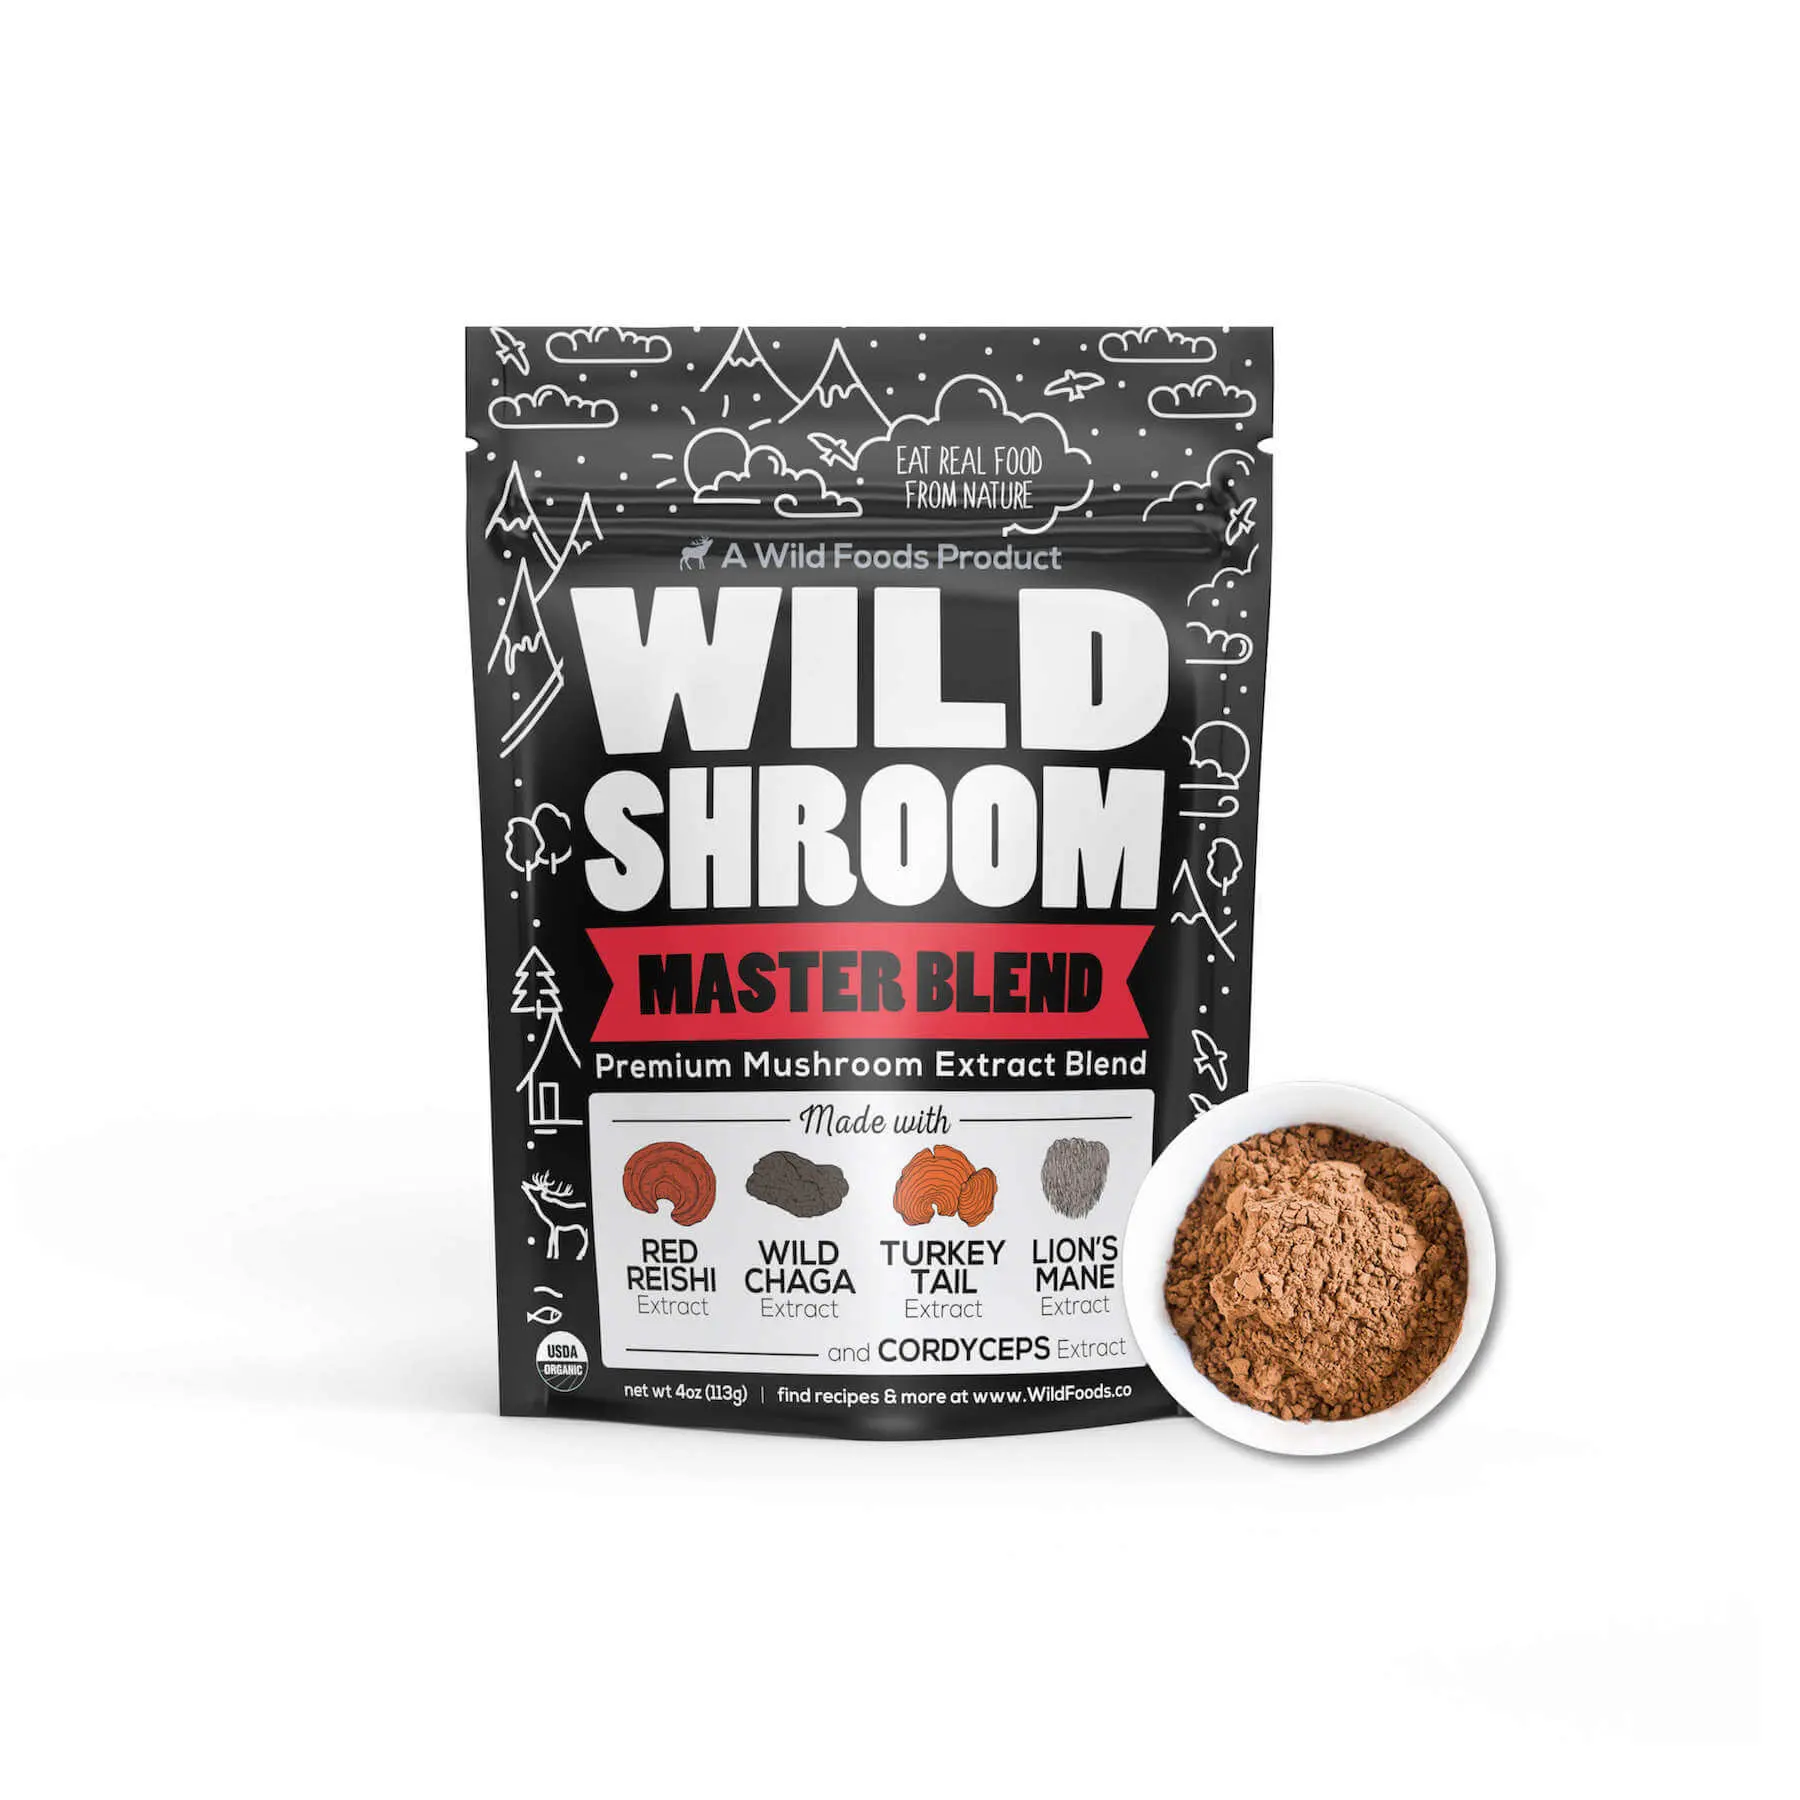 WILD FOODS CO: 12% OFF Your First Order